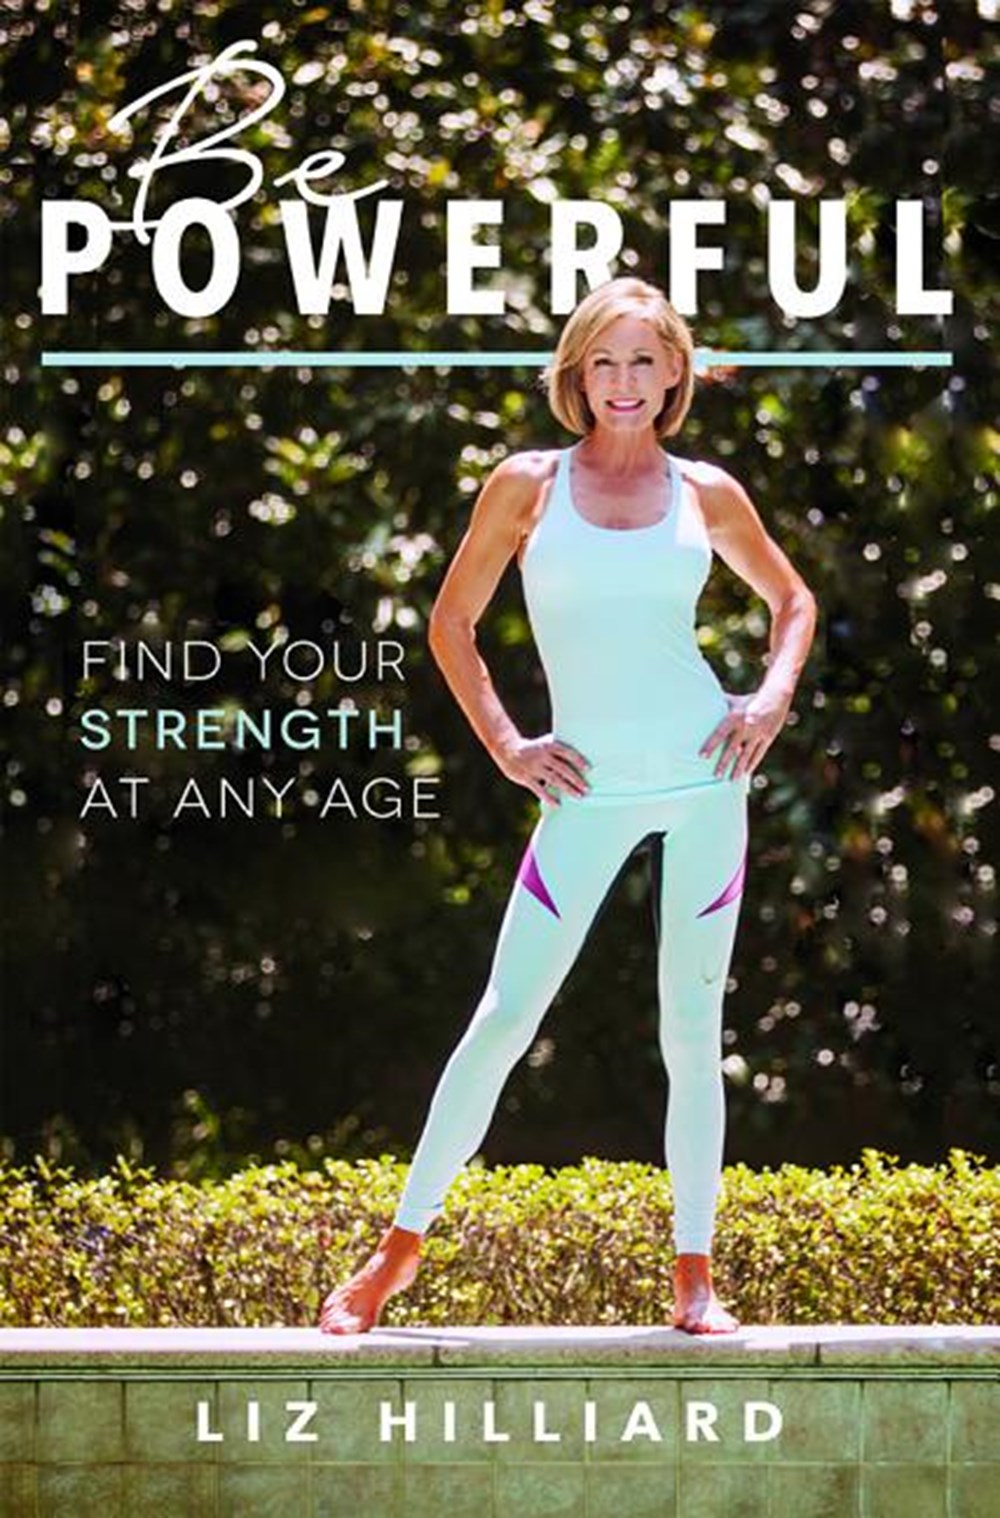 Be Powerful: Find Your Strength at Any Age